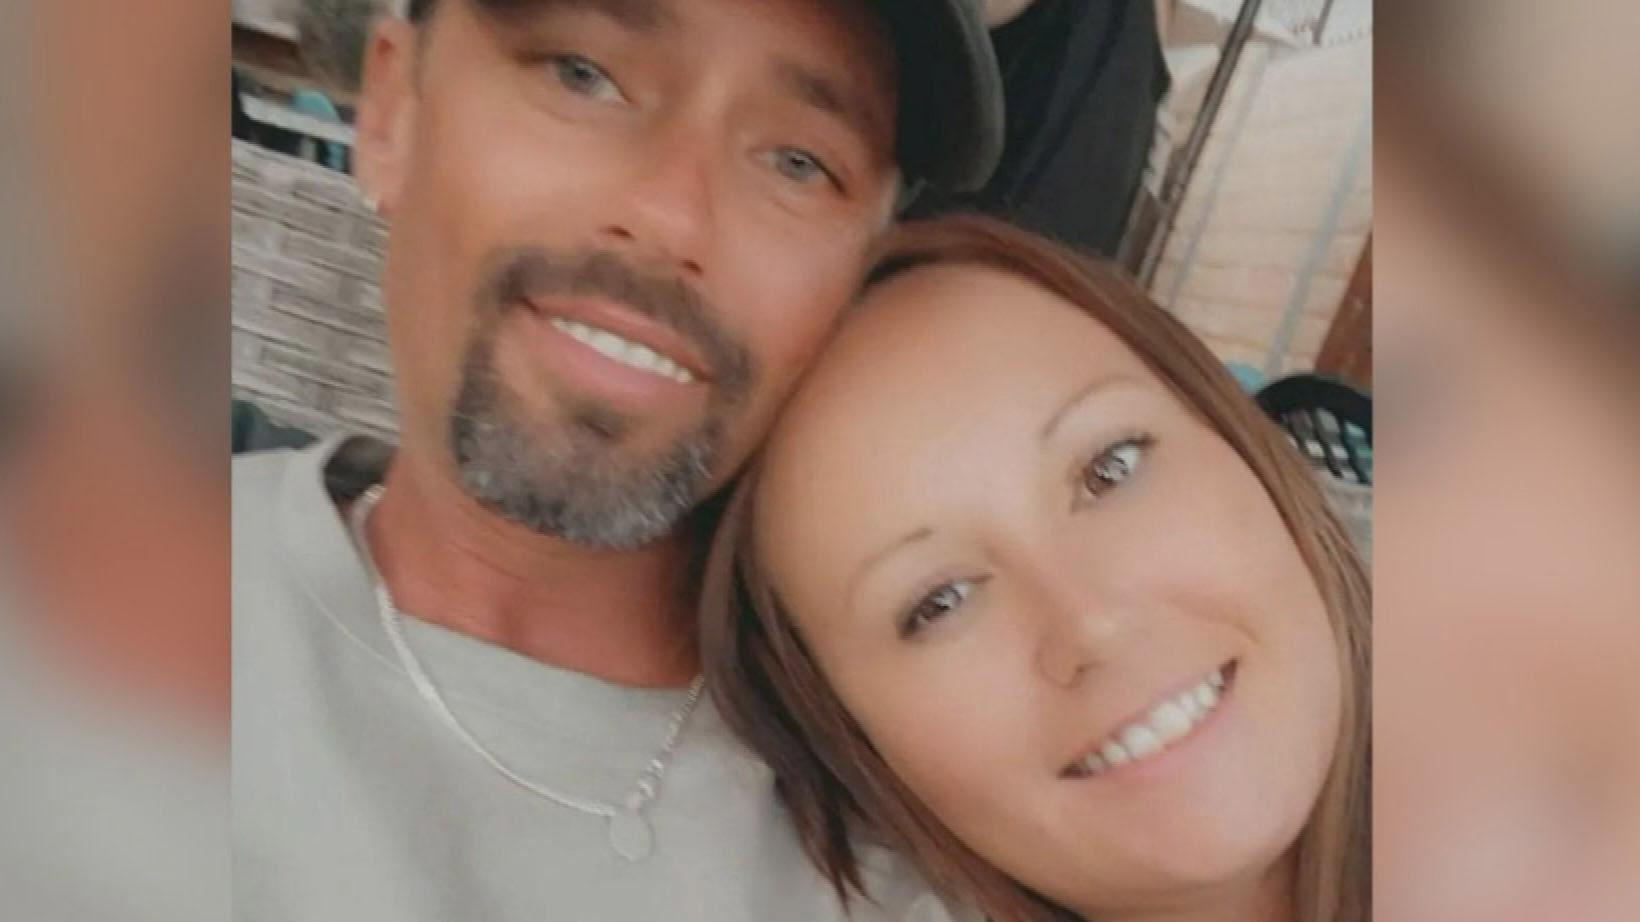 Tributes are being paid to two drivers who died in a horror head-on crash in ﻿South Australia﻿.Emergency services were called to Lincoln Highway in Whyalla, four hours north-west of Adelaide yesterday where a Hilux ute and a Rav 4 had collided head-on.
Both drivers Travis Terry, 35, from Whyalla Stuart and Whyalla woman Kimberly Pursche, 37, died at the scene.